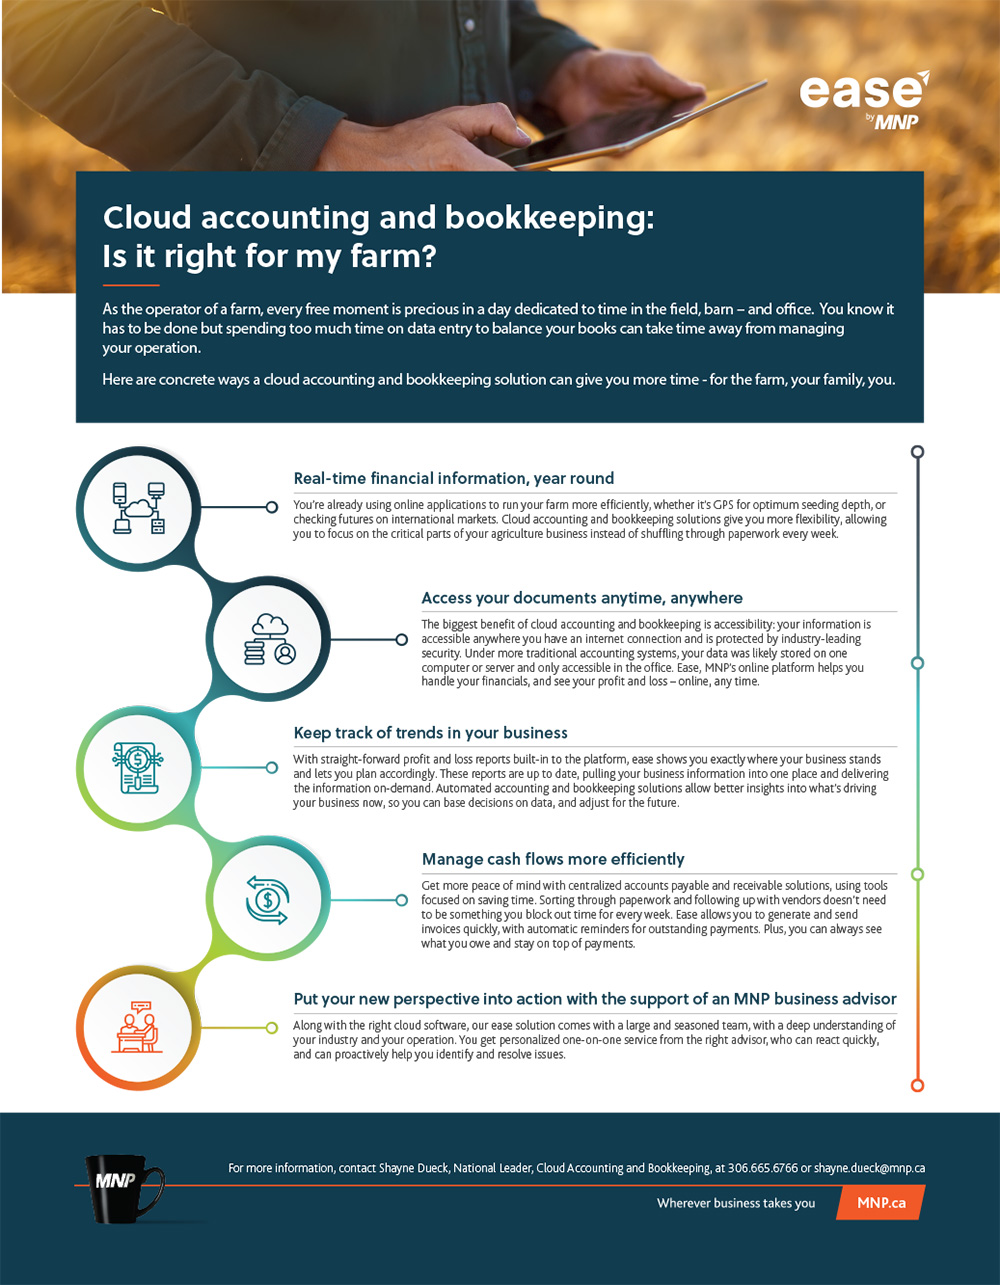 Cloud accounting and bookkeeping: Is it right for my farm?